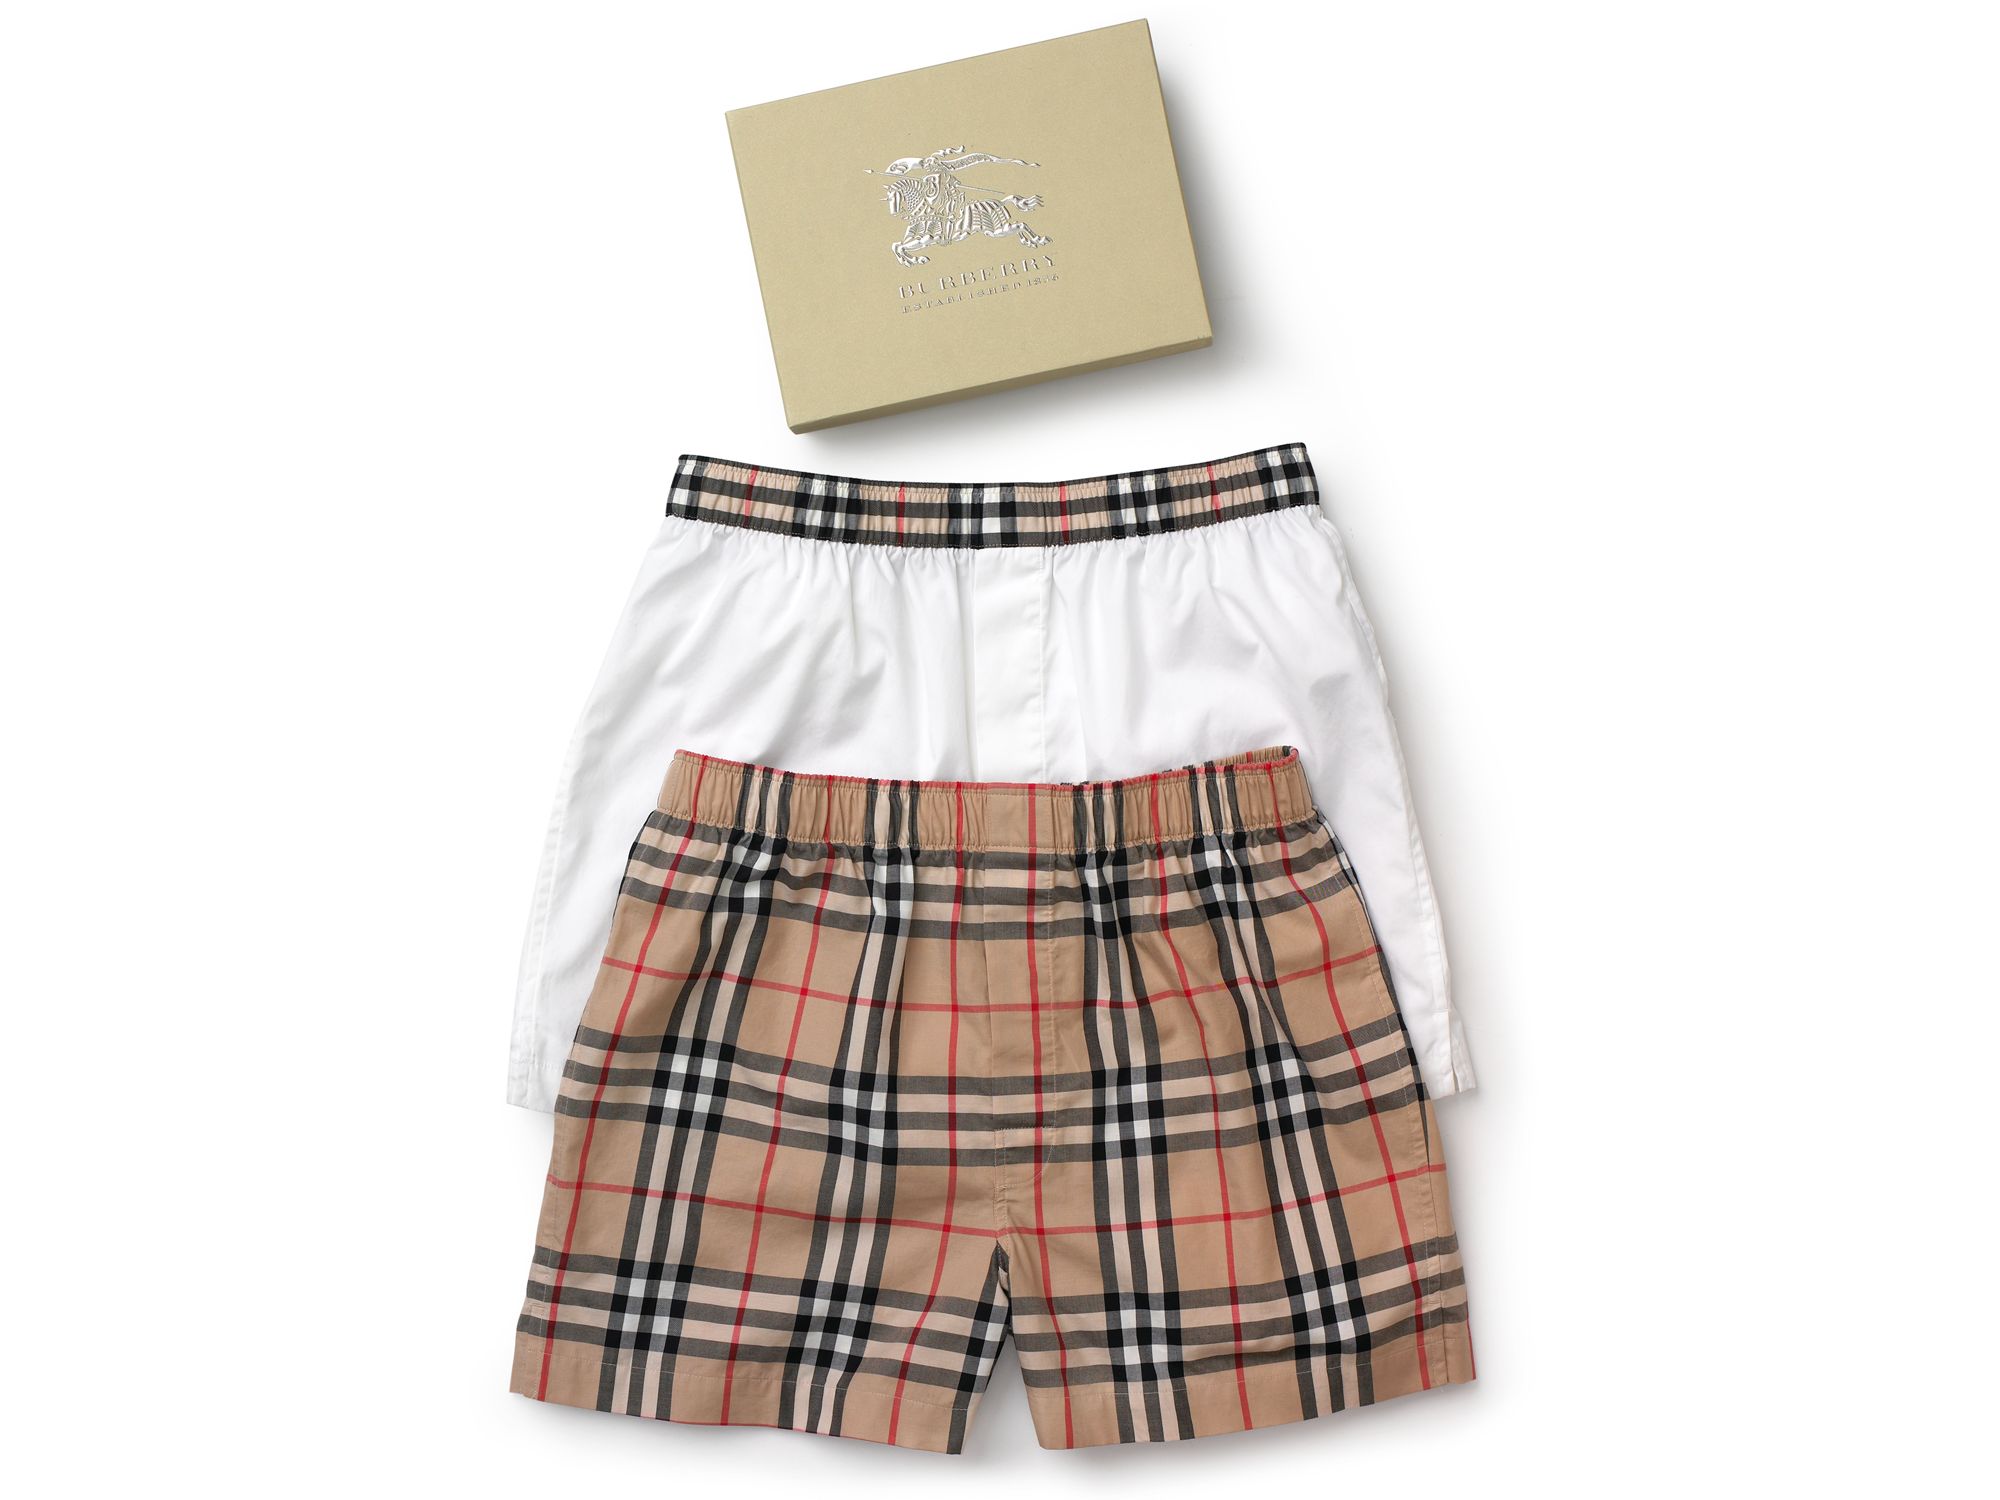 Burberry 2 Pack Boxers Gift Set for Men - Lyst